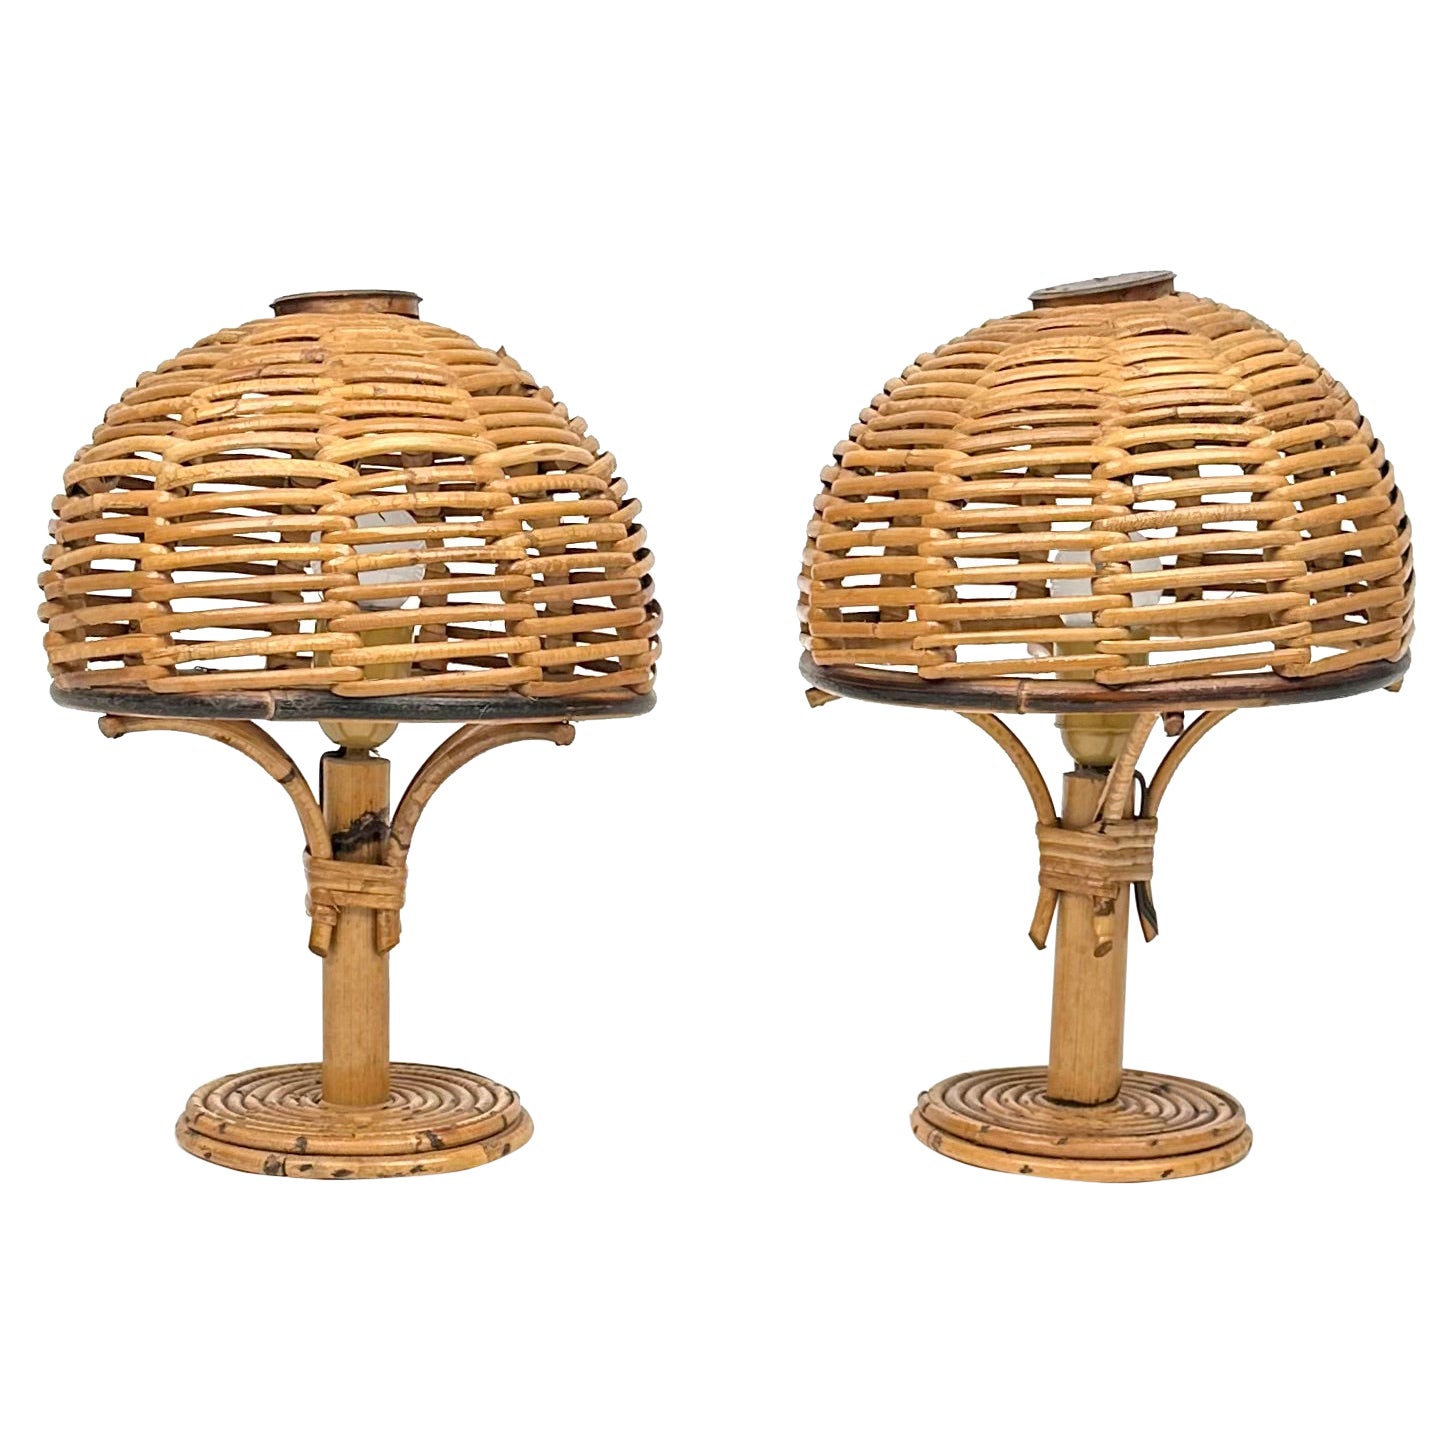 Midcentury Bamboo and Rattan Pair of Table Lamps Louis Sognot Style, Italy 1960s For Sale